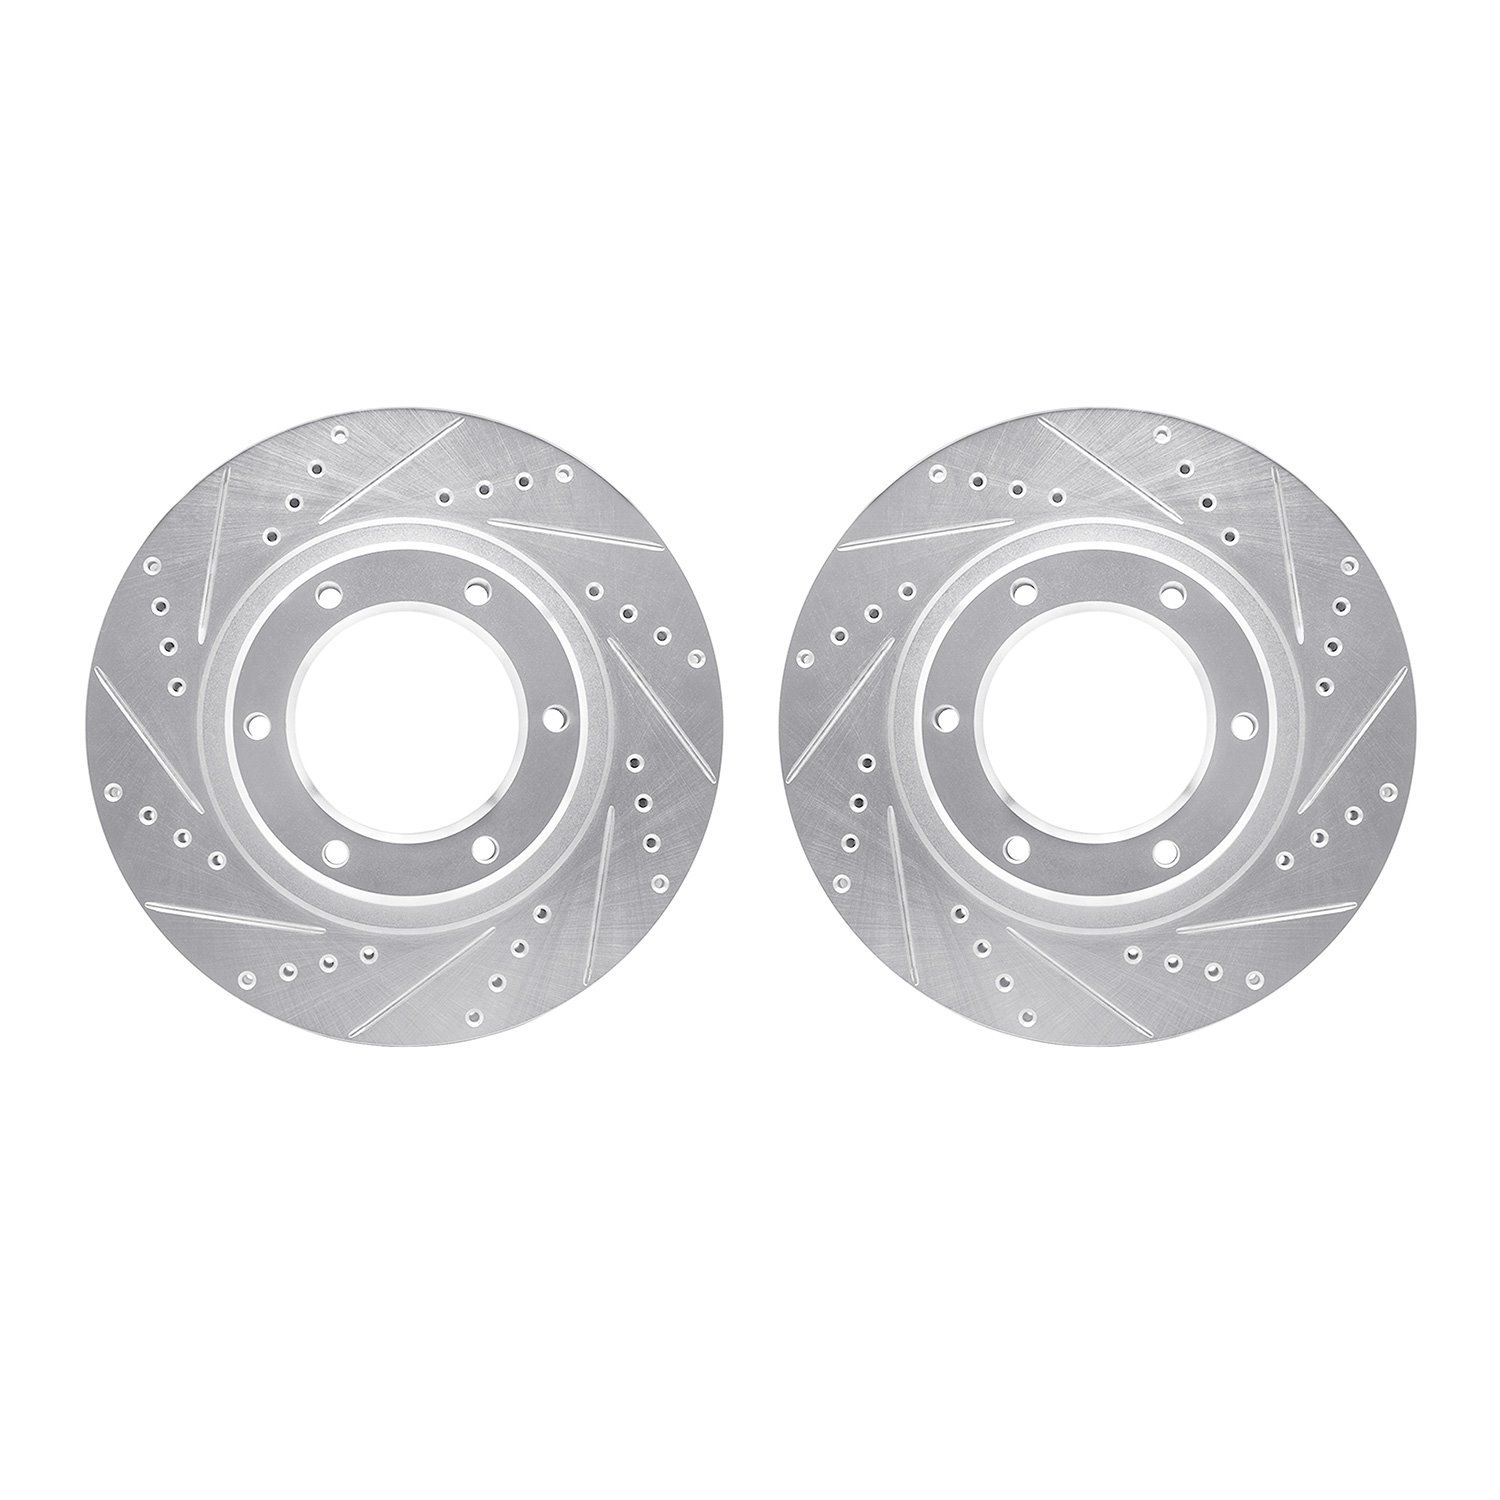 Drilled/Slotted Brake Rotors [Silver], 1990-1992 Lexus/Toyota/Scion